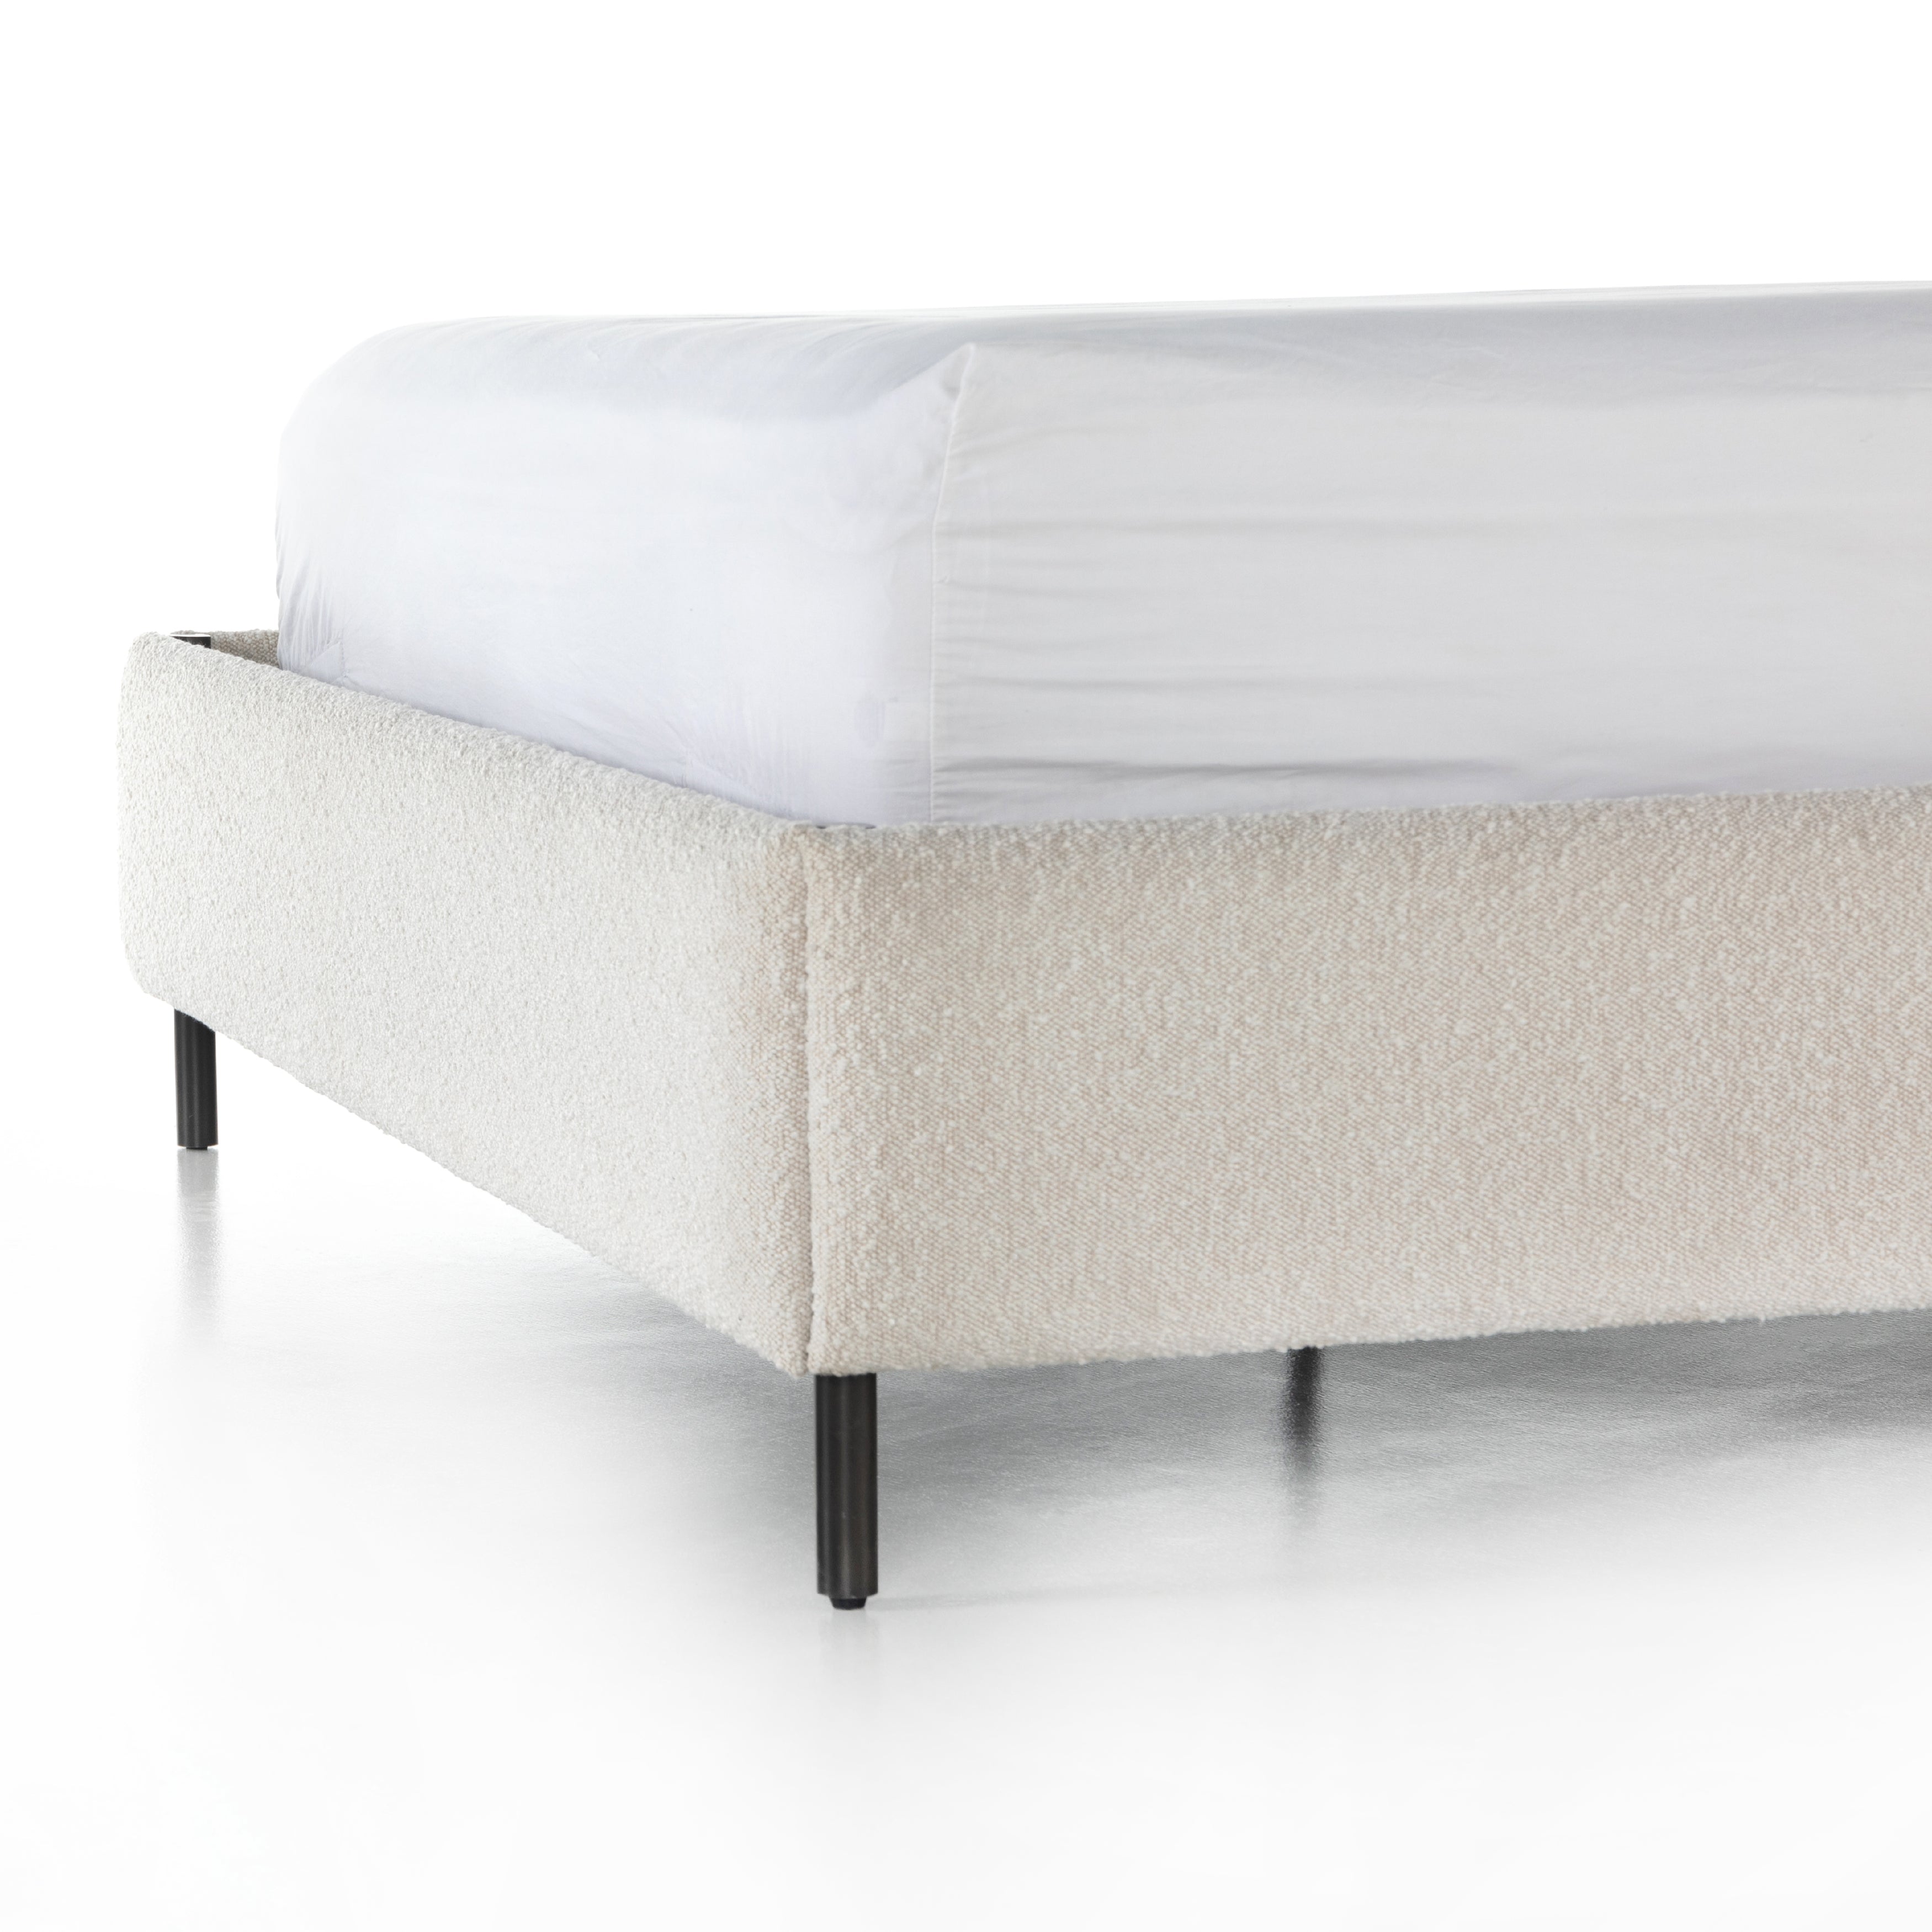 Bring texture into play. Upholstered in a classic cream-colored boucle, with decorative leather straps adding a material-driven touch with contrast. Standard box spring required. Amethyst Home provides interior design services, furniture, rugs, and lighting in the Portland metro area.